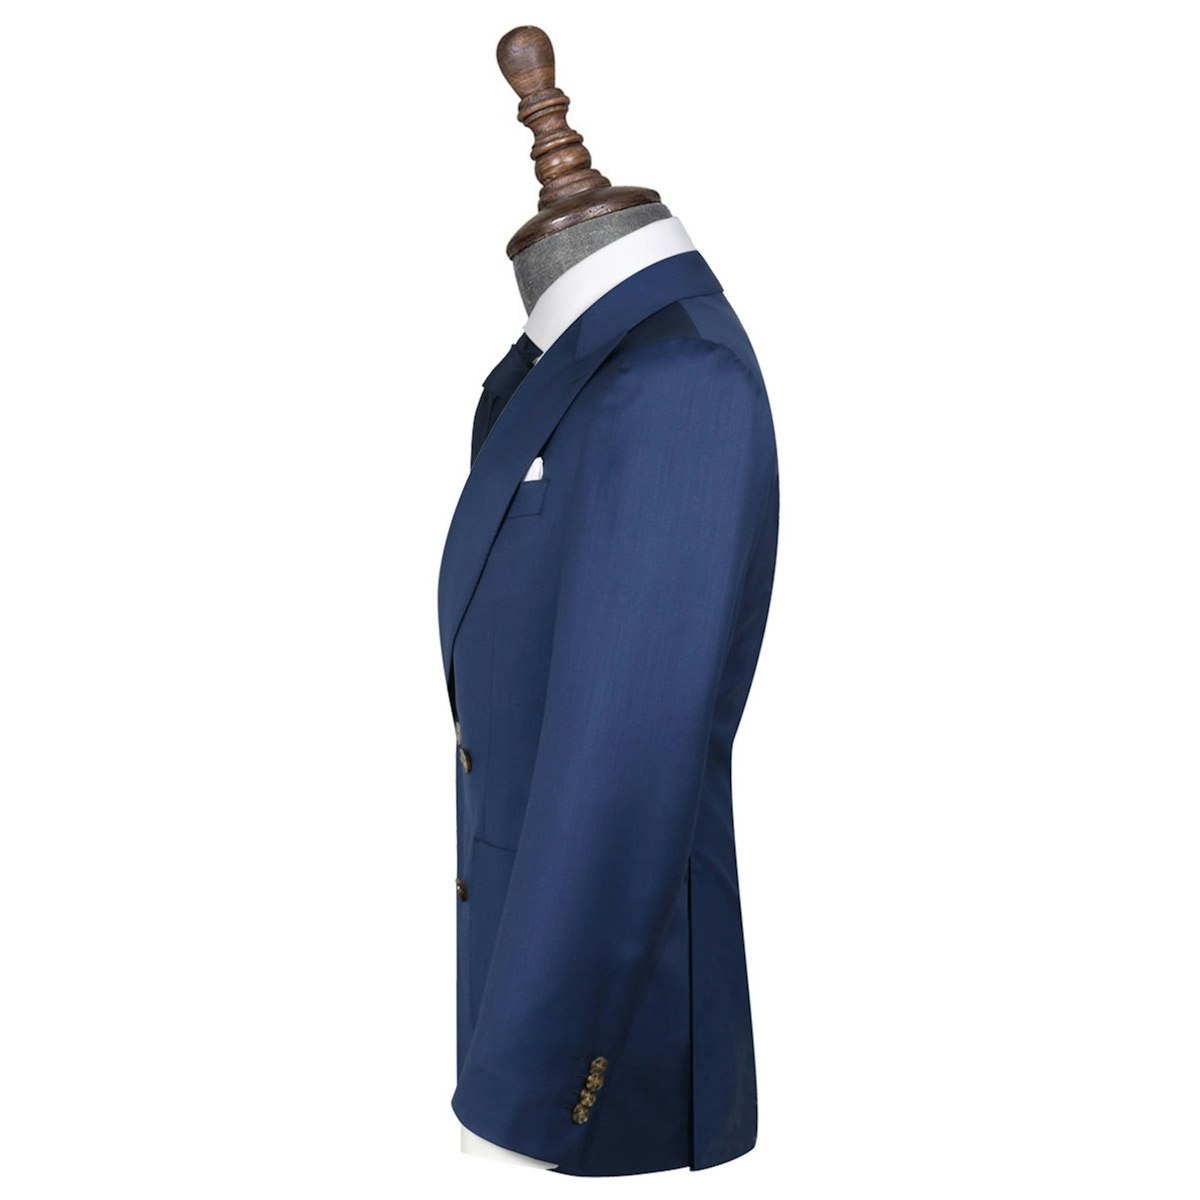 InStitchu Collection The De Rossi Navy Blue Wool Jacket